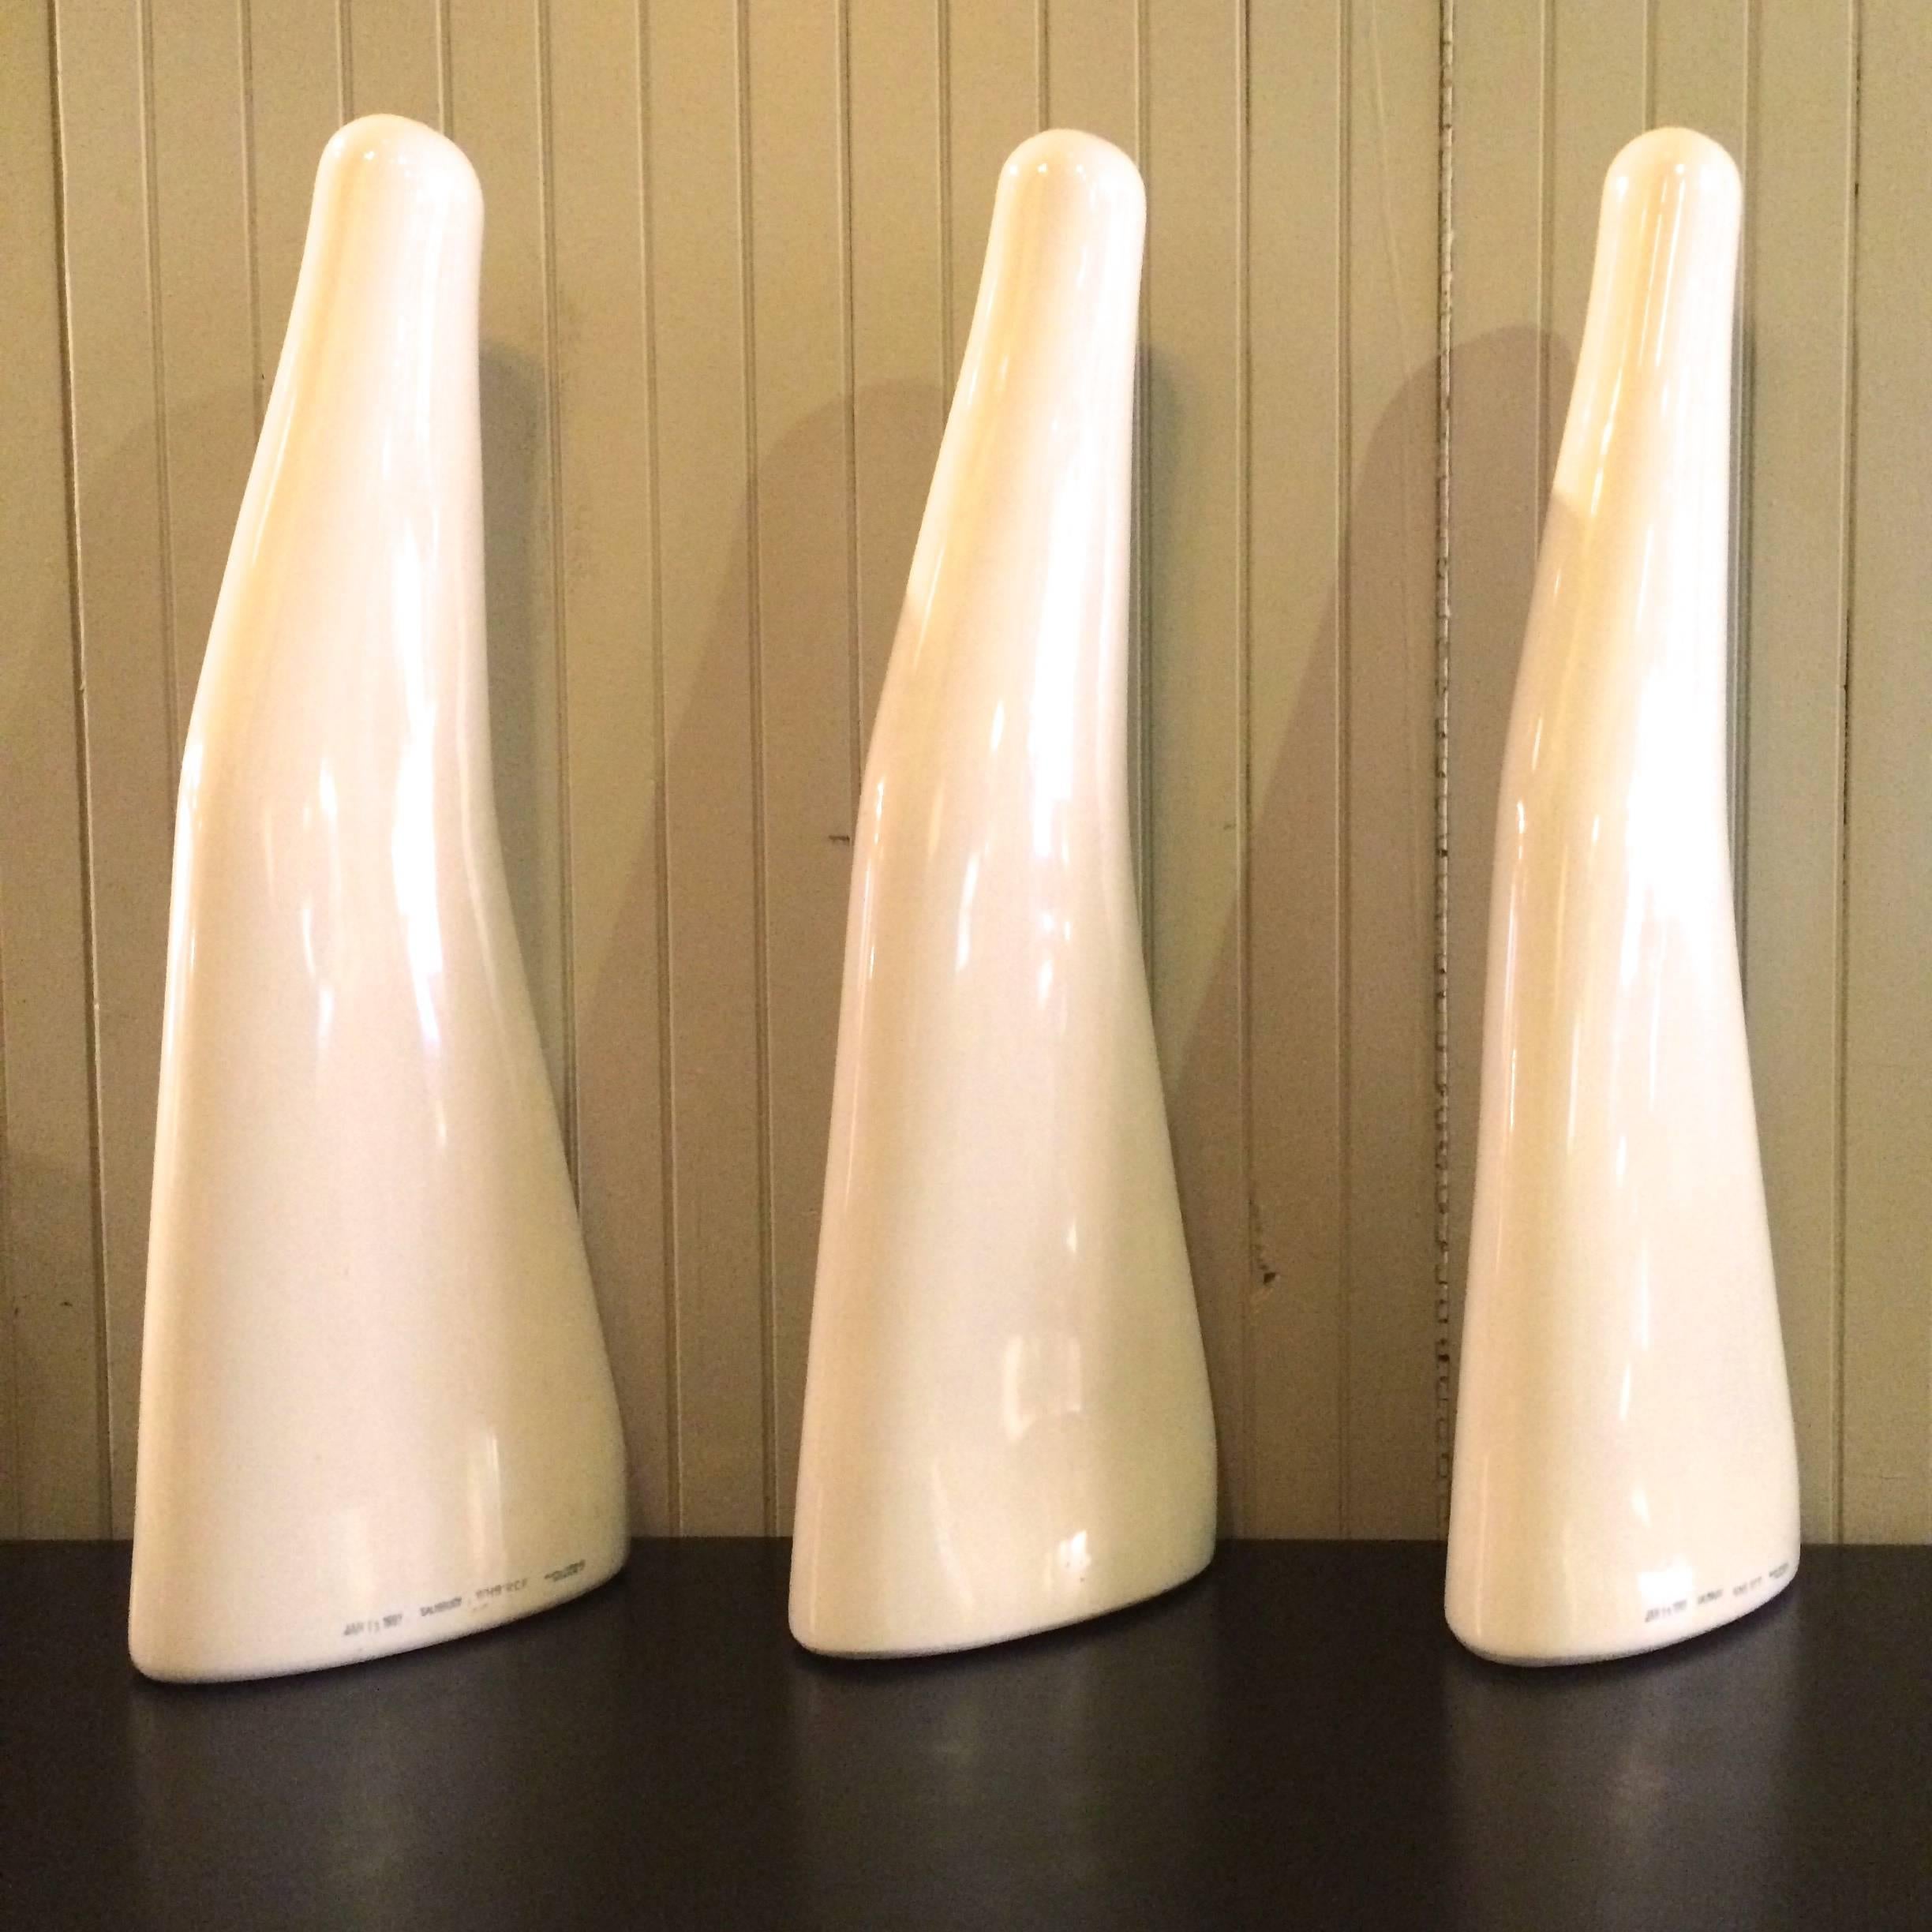 Tall, porcelain, stocking display molds make striking, abstract, industrial sculptures, objects or accent pieces. One mold is available from this set. We have another mold listed separately as it has a slightly different angle.